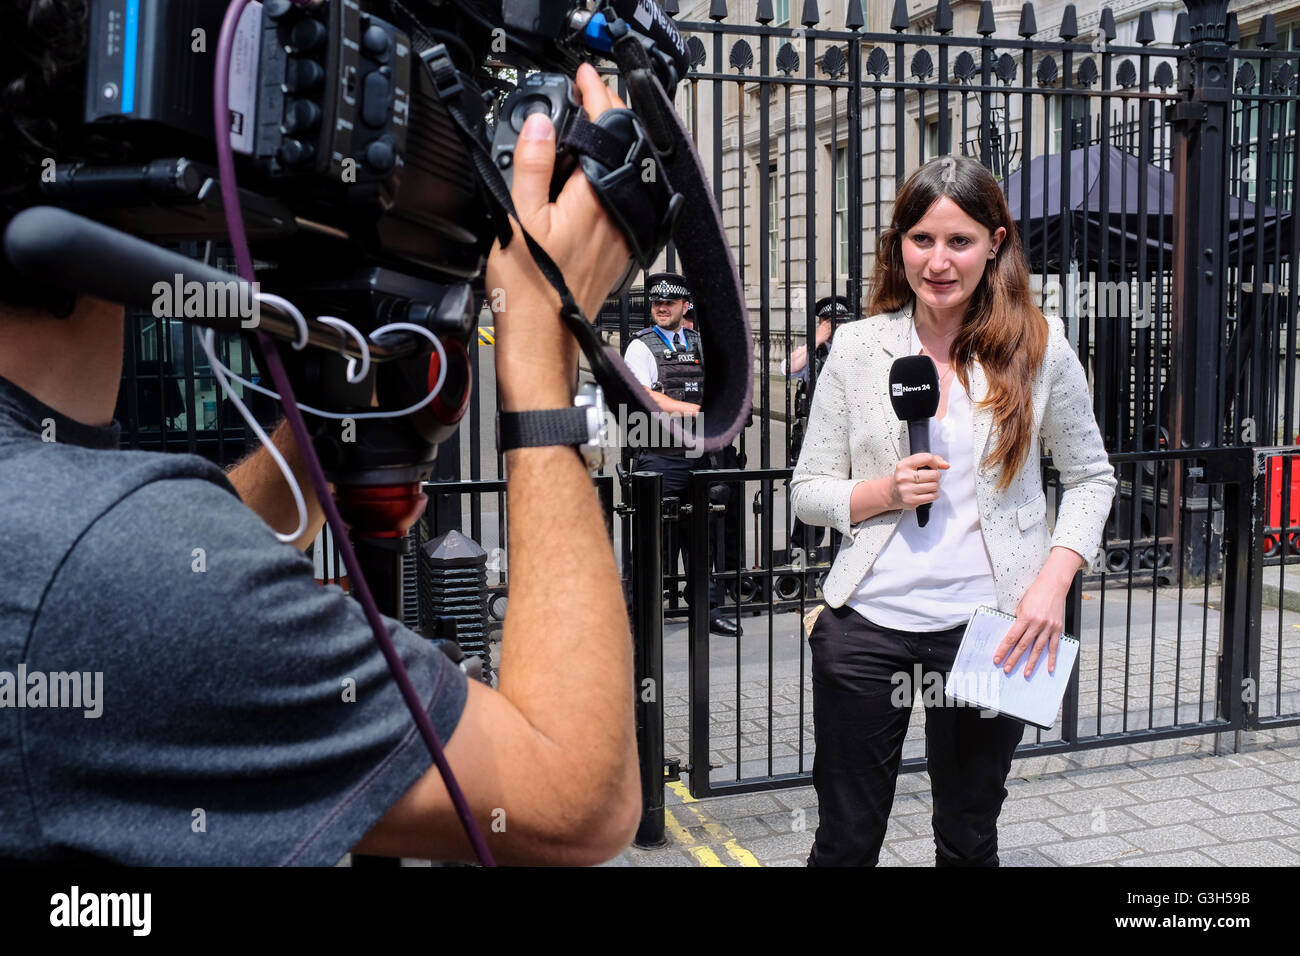 London, UK. 24 June 2016. Television news reporter  from Italian network RAI News 24 presents live to camera outside Downing Street  after Prime Minister David Cameron's announcement of his resignation following EU referendum outcome. Stock Photo